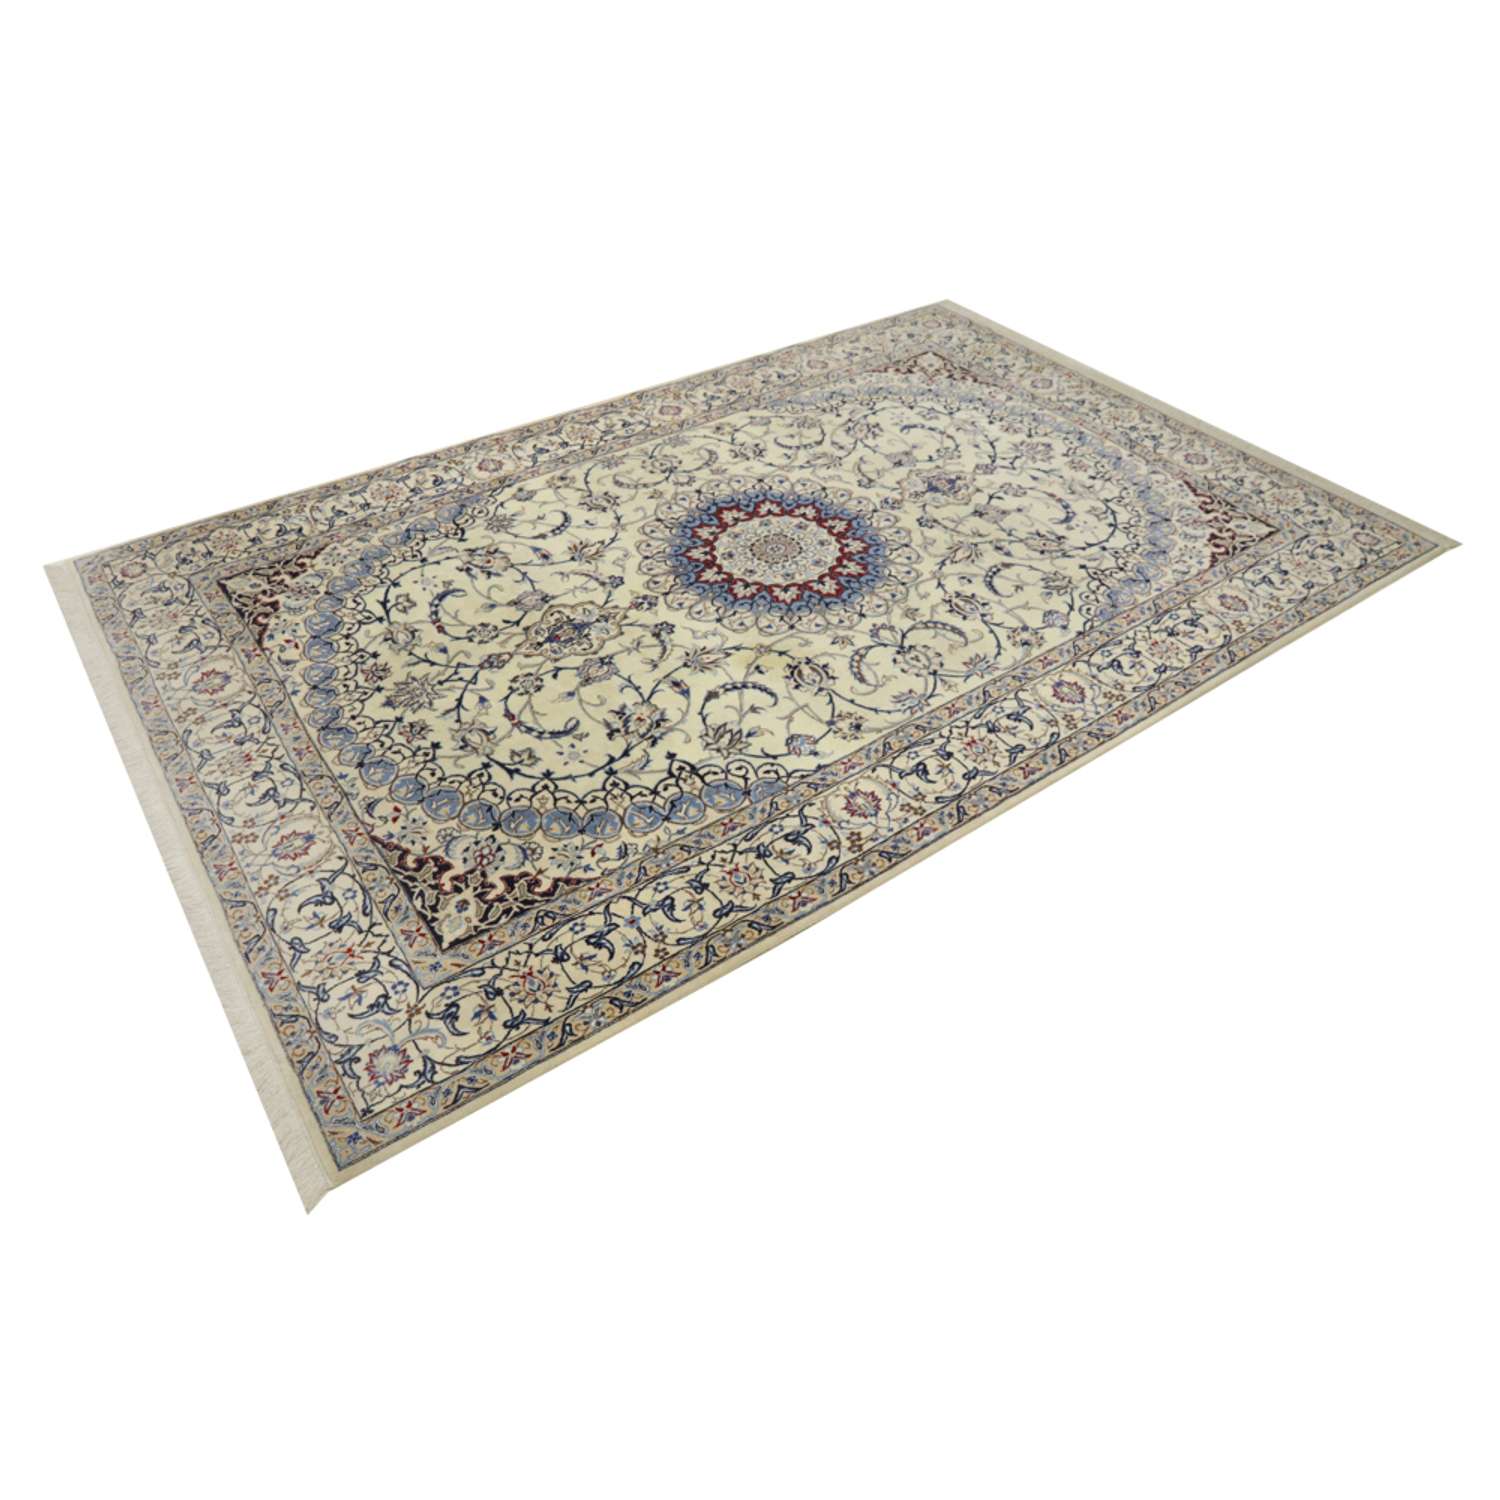 Persisk teppe - Nain - Royal - 315 x 205 cm - beige